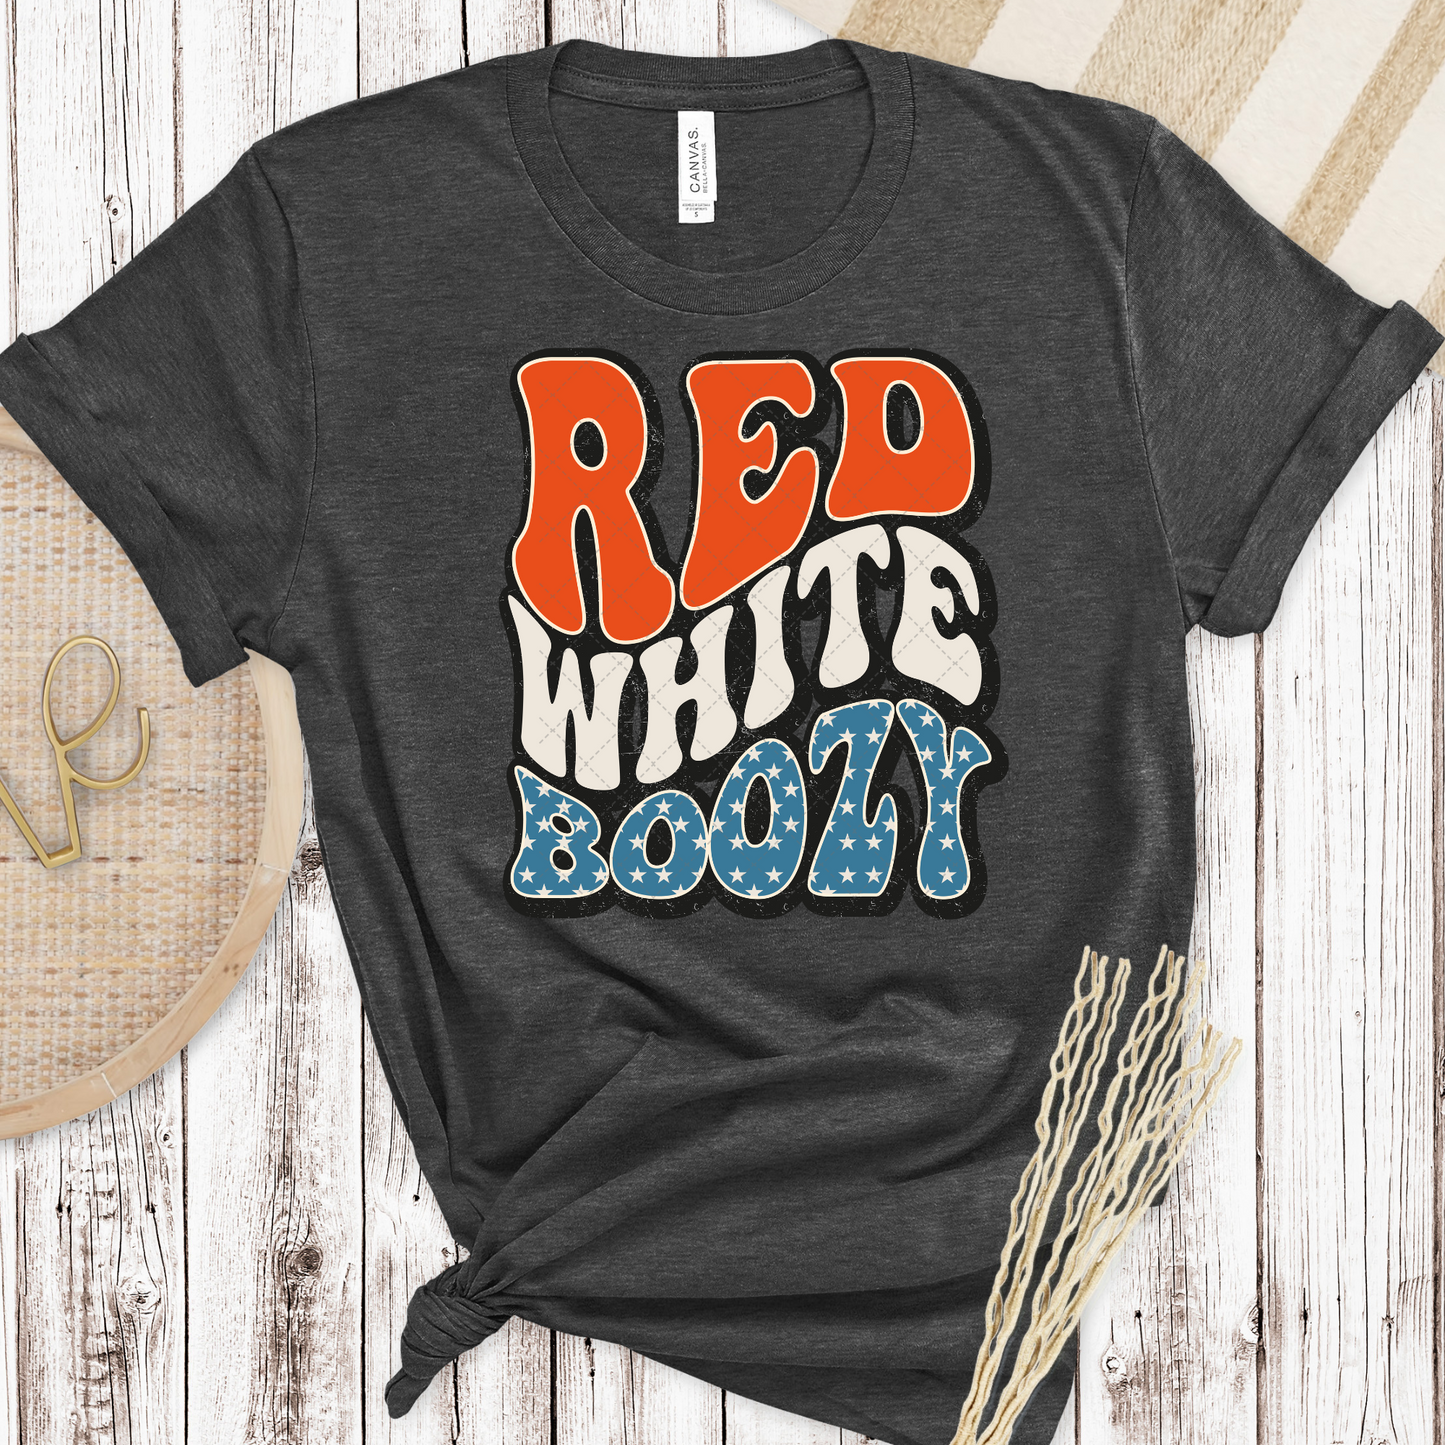 Red White and Boozy Distressed Transfer